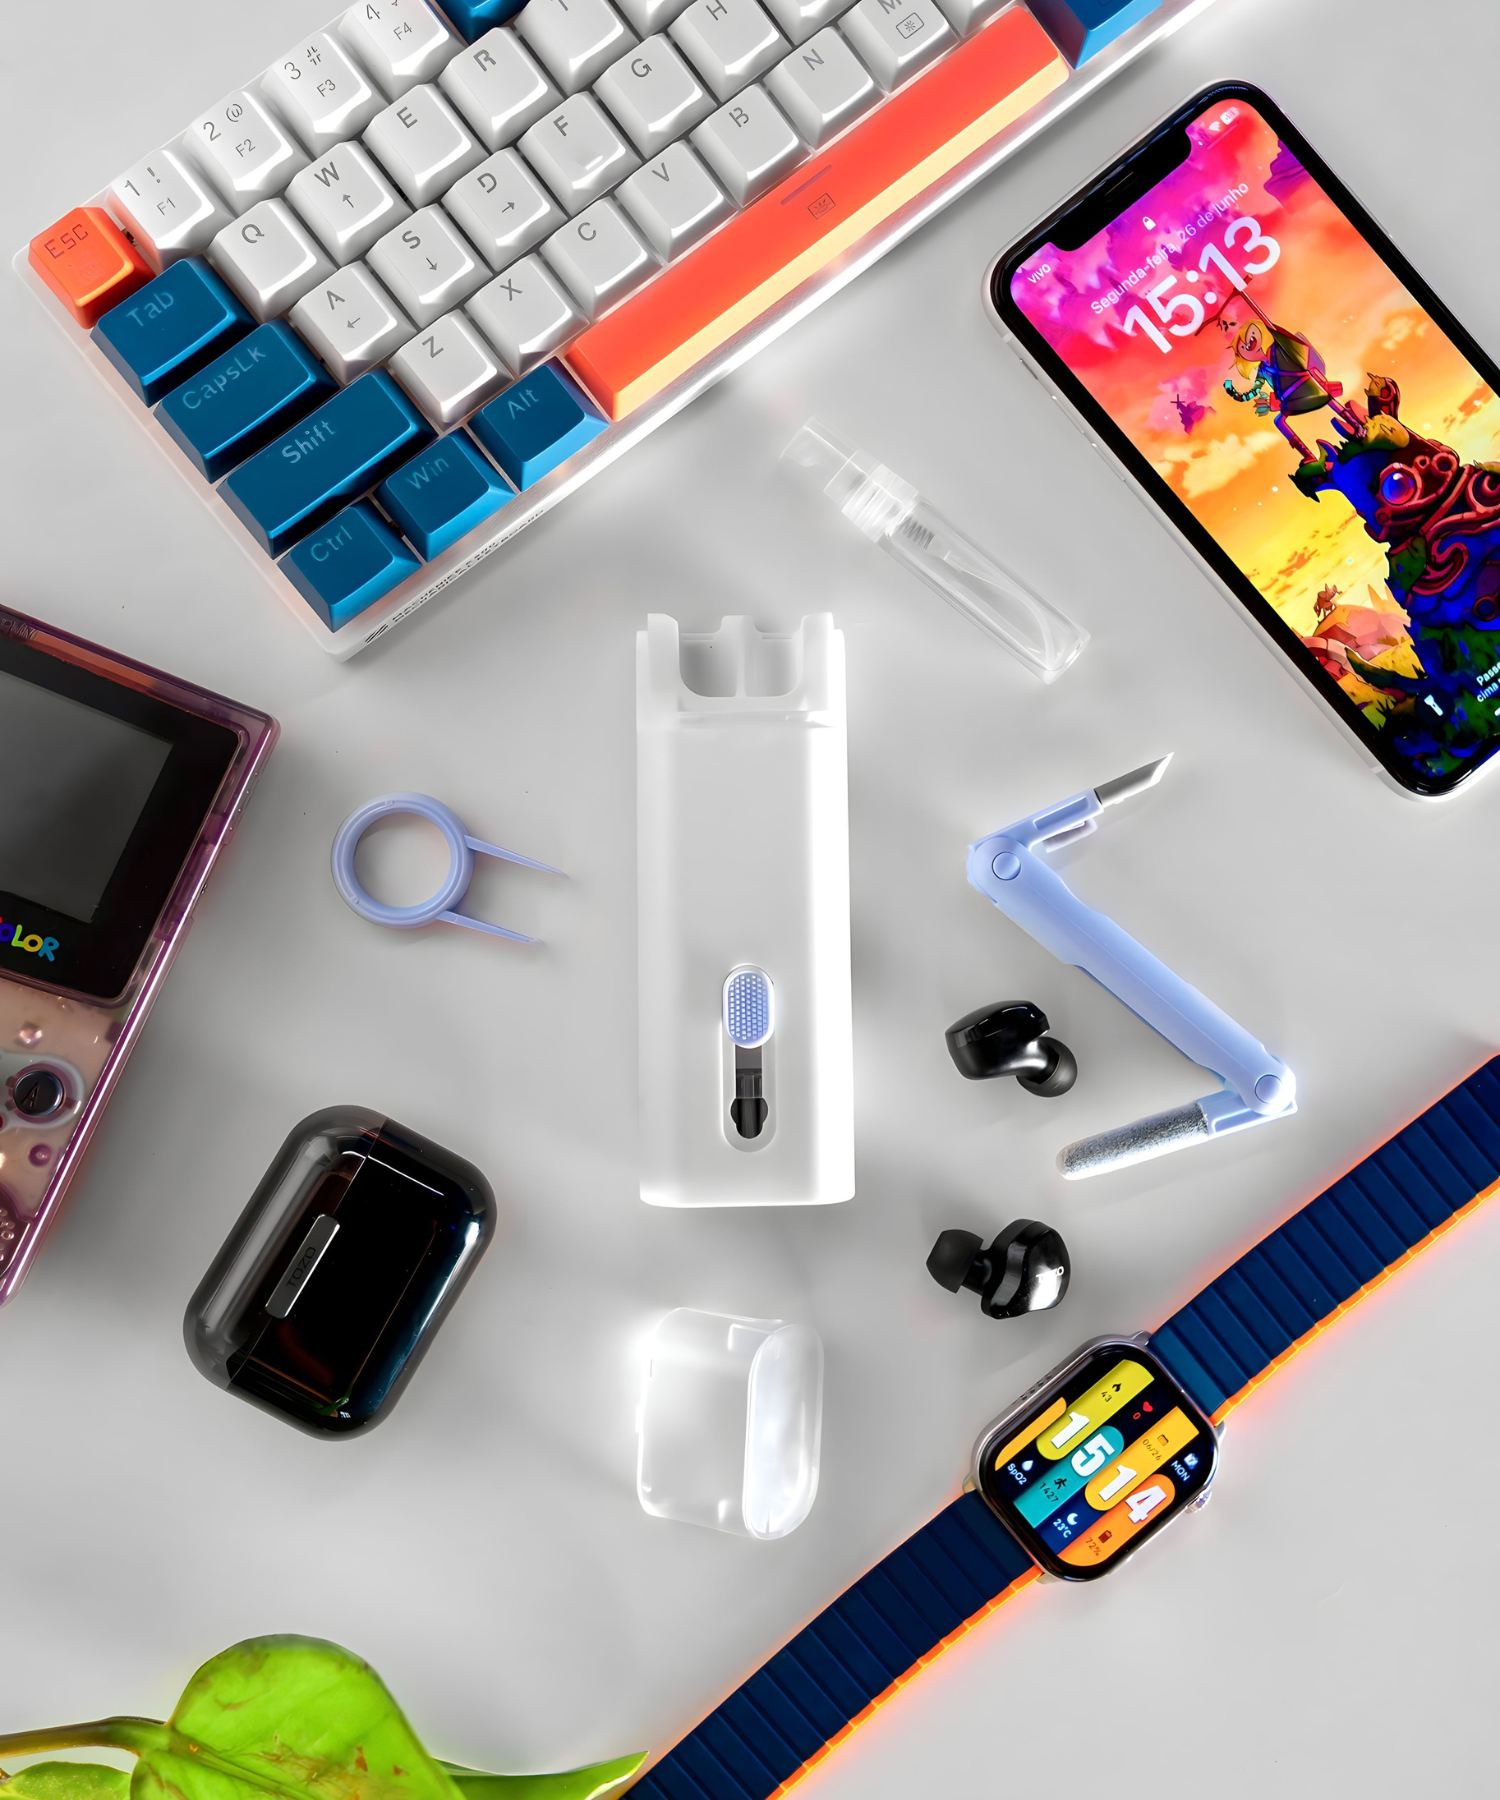 asthetic picture containing mechanical keyboard, airpods, iphone gadget cleaner and nintendo gameboy